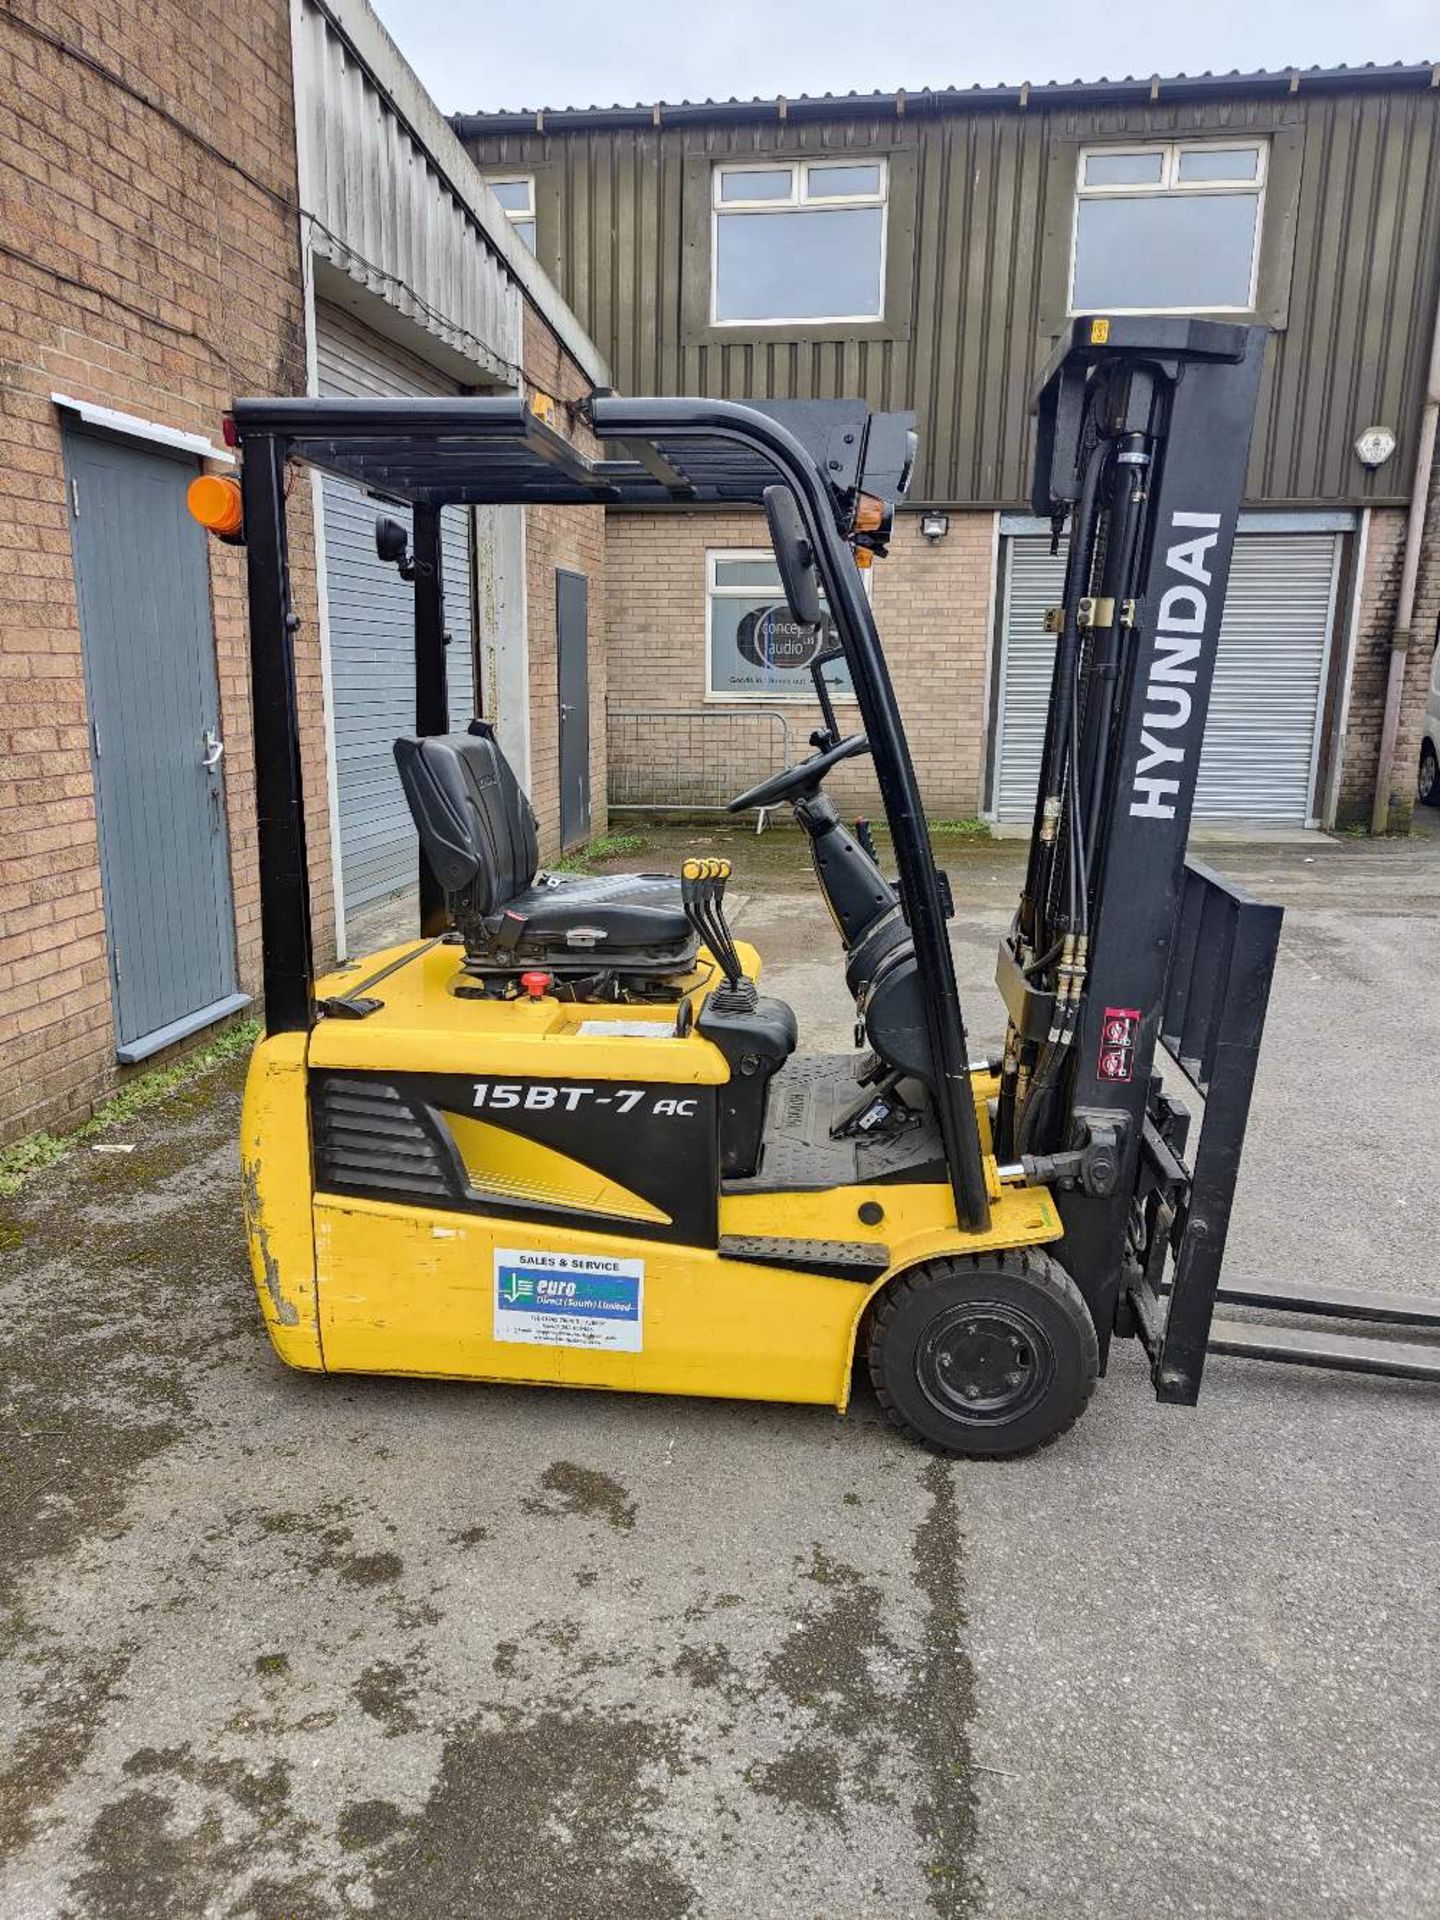 Hyundai 15BT-7 Electric Forklift - Image 7 of 12